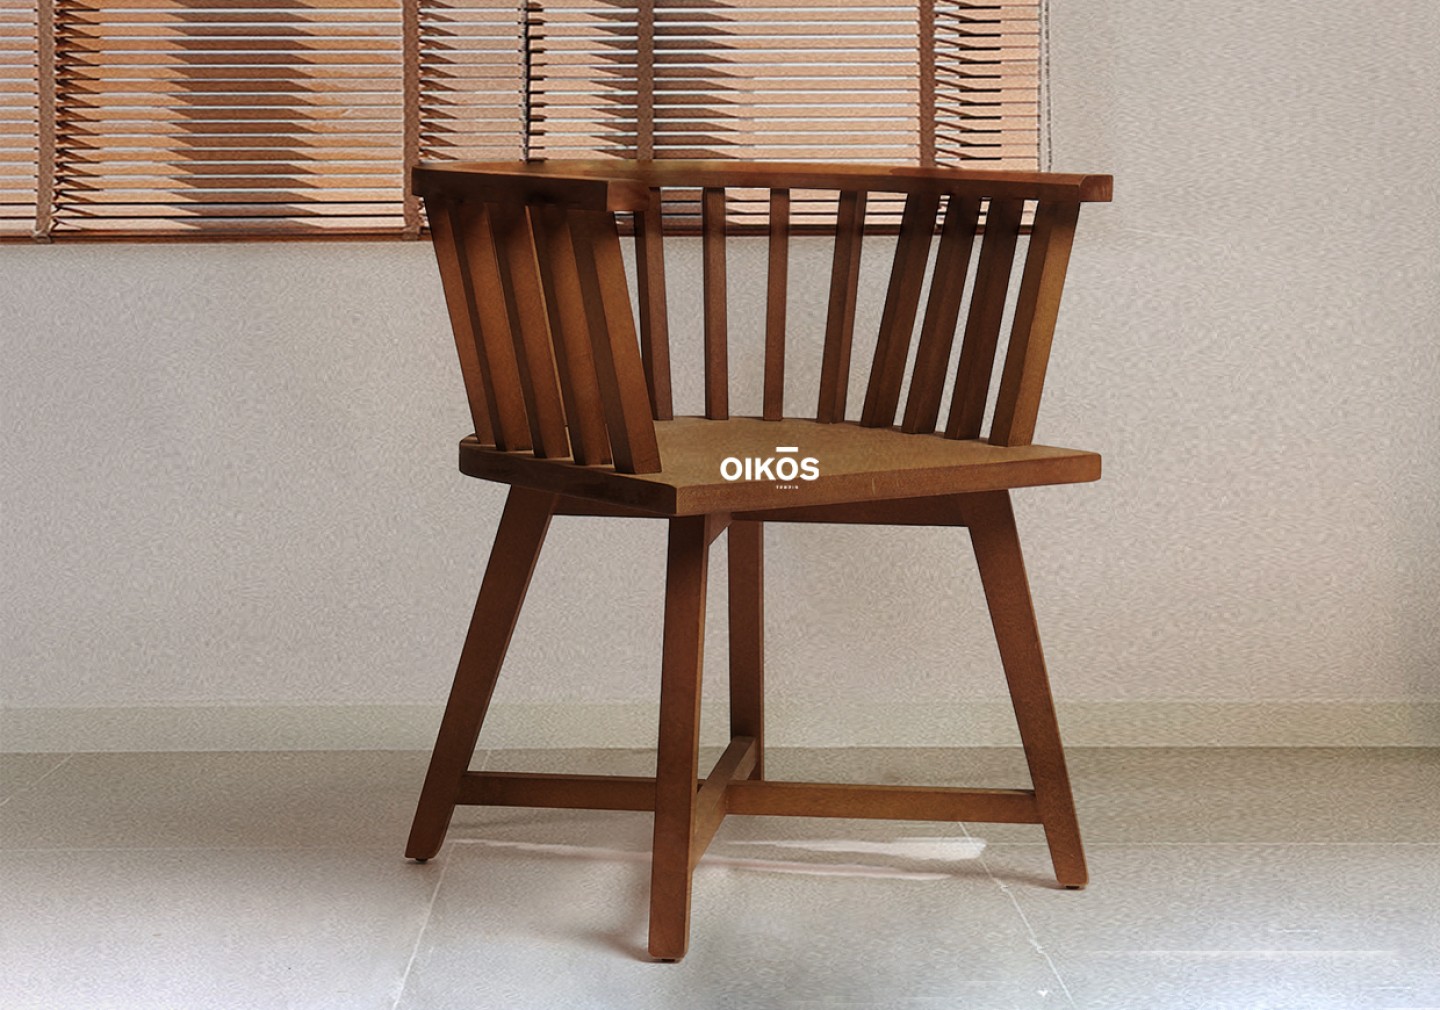 THE THEA DINING CHAIR